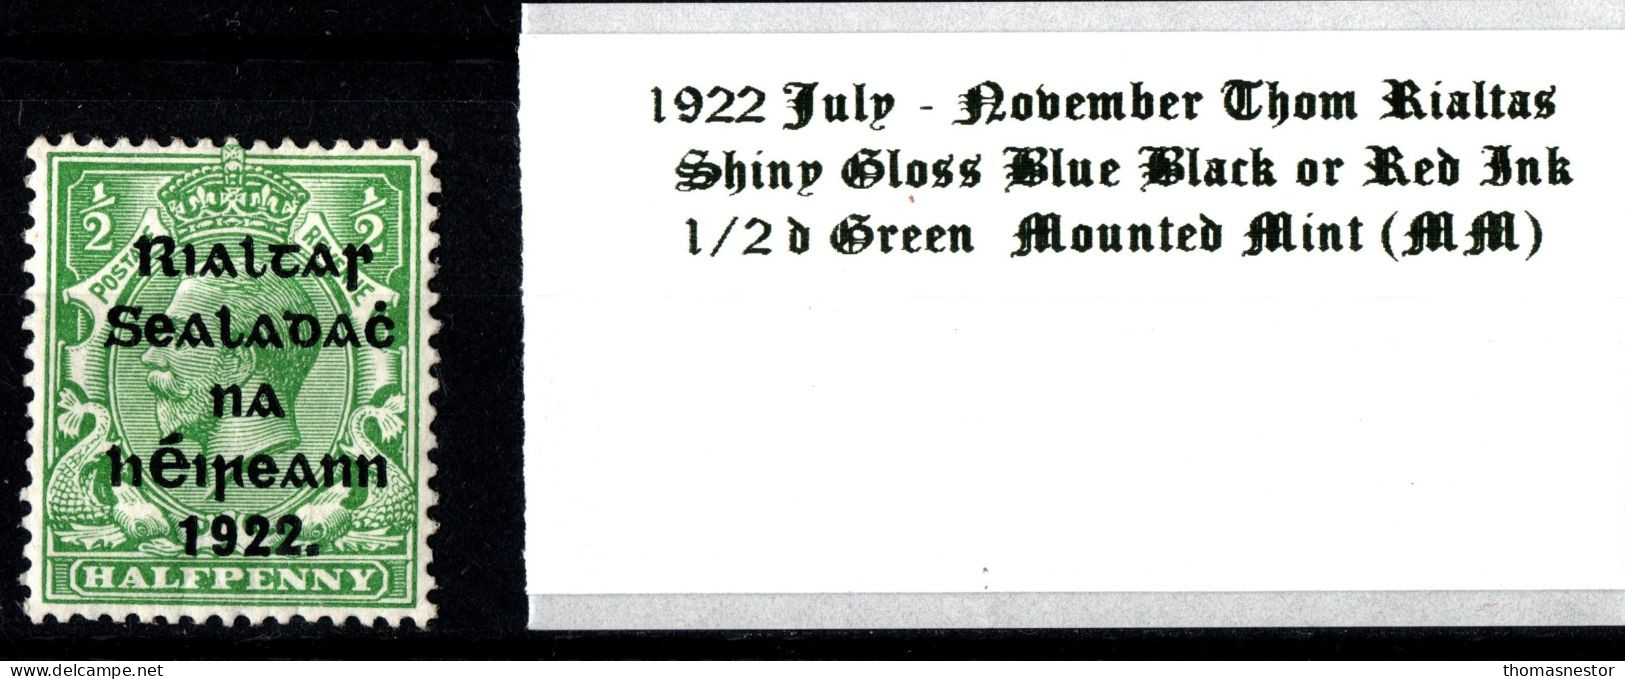 1922 July - November Thom Rialtas 5 Line Overprint In Shiny Blue Black Or Red Ink 1/2 D Green Mounted Mint (MM) - Unused Stamps